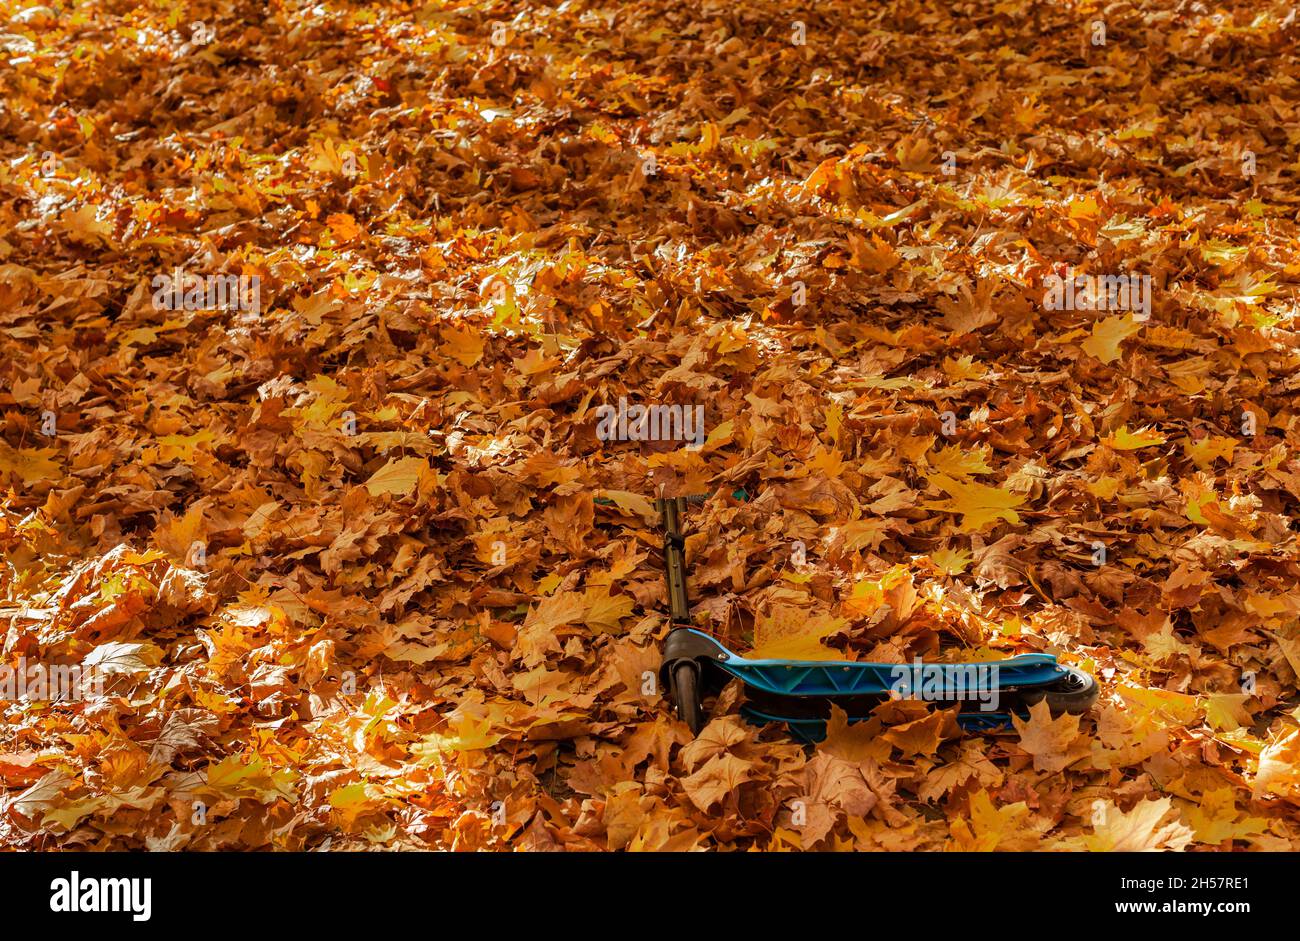 scooter lying in the autumn foliage Stock Photo